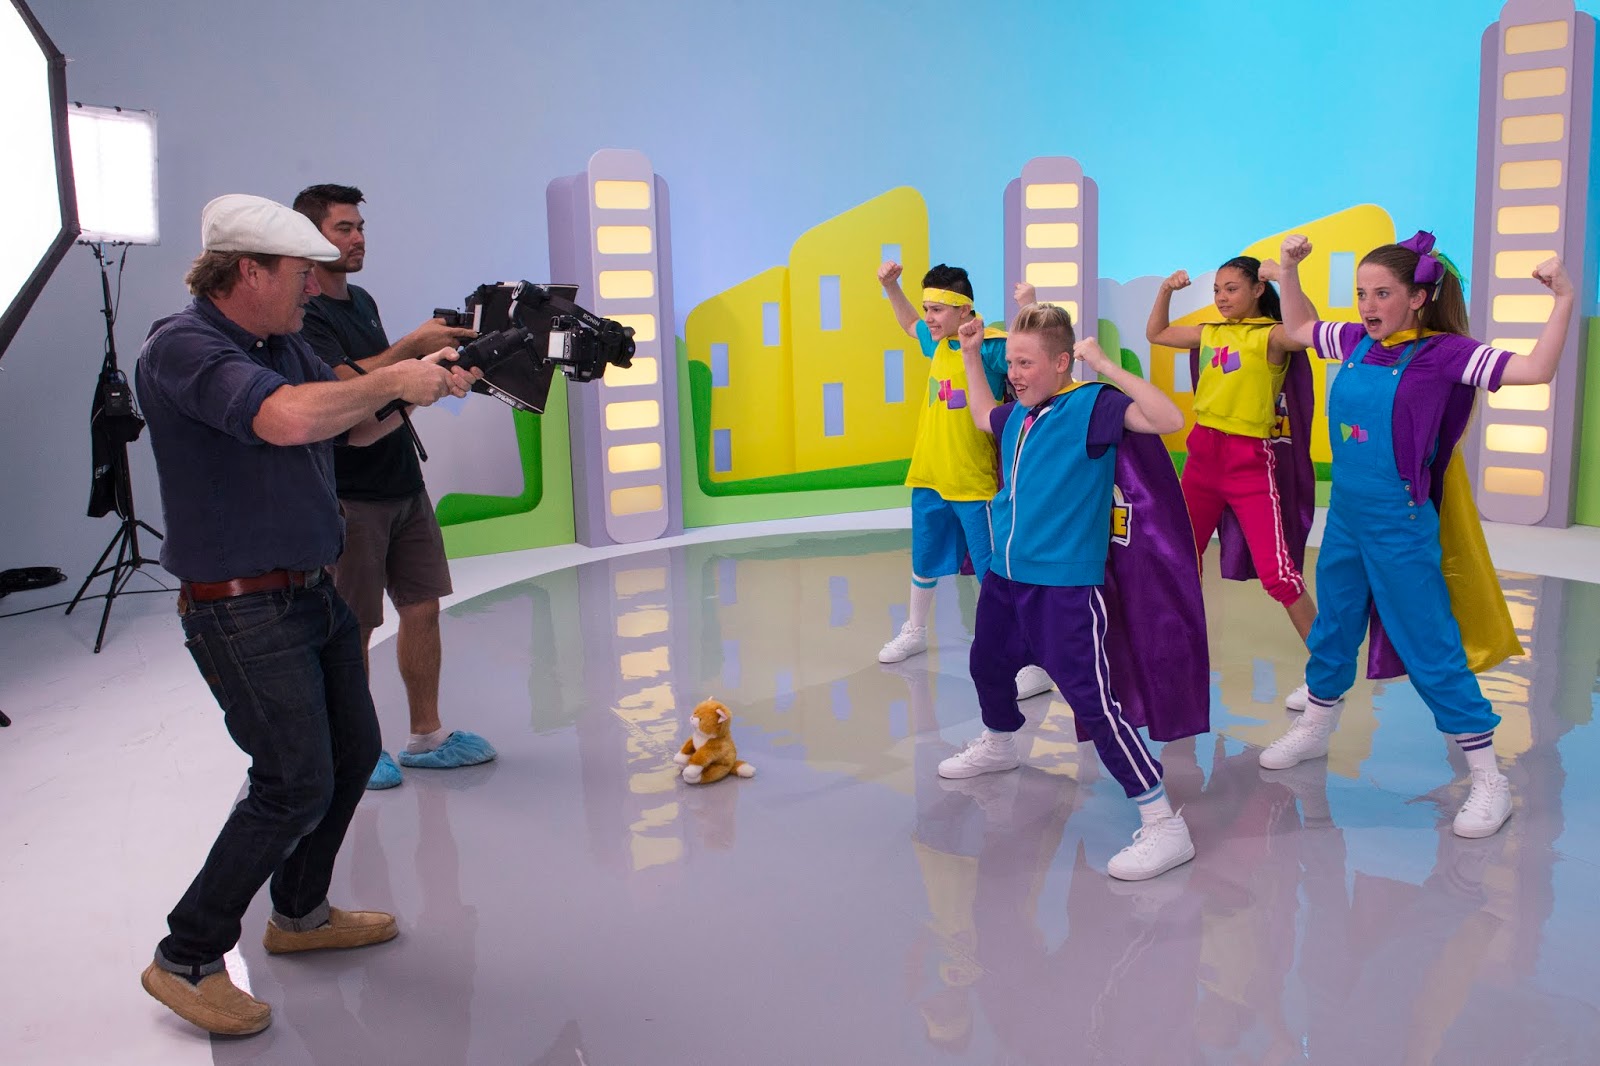 NickALive!: Nickelodeon Brazil Greenlights 'Nick Master Slime' Season 2;  Now Accepting Contestant Applications